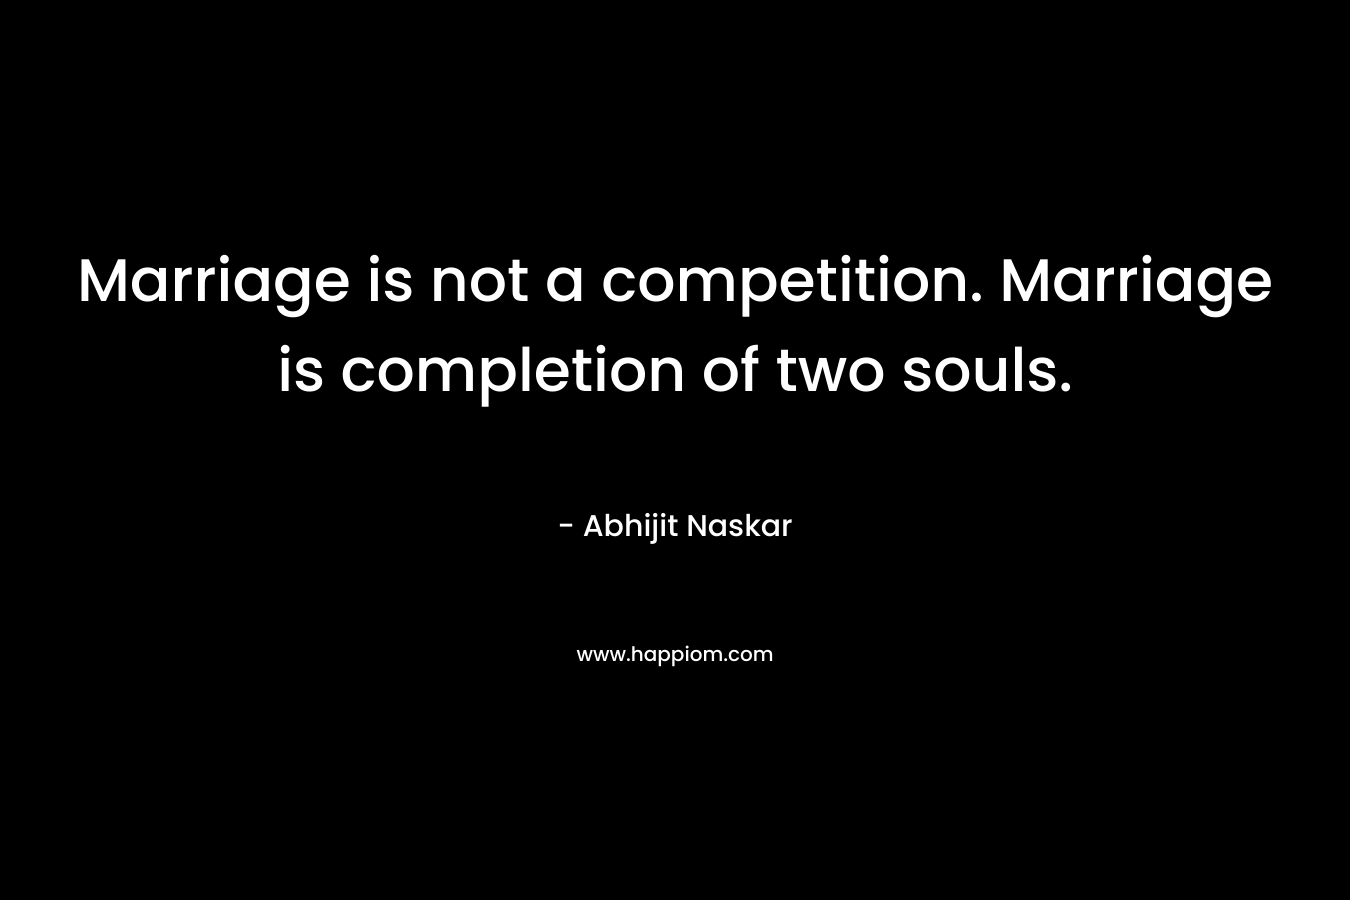 Marriage is not a competition. Marriage is completion of two souls.